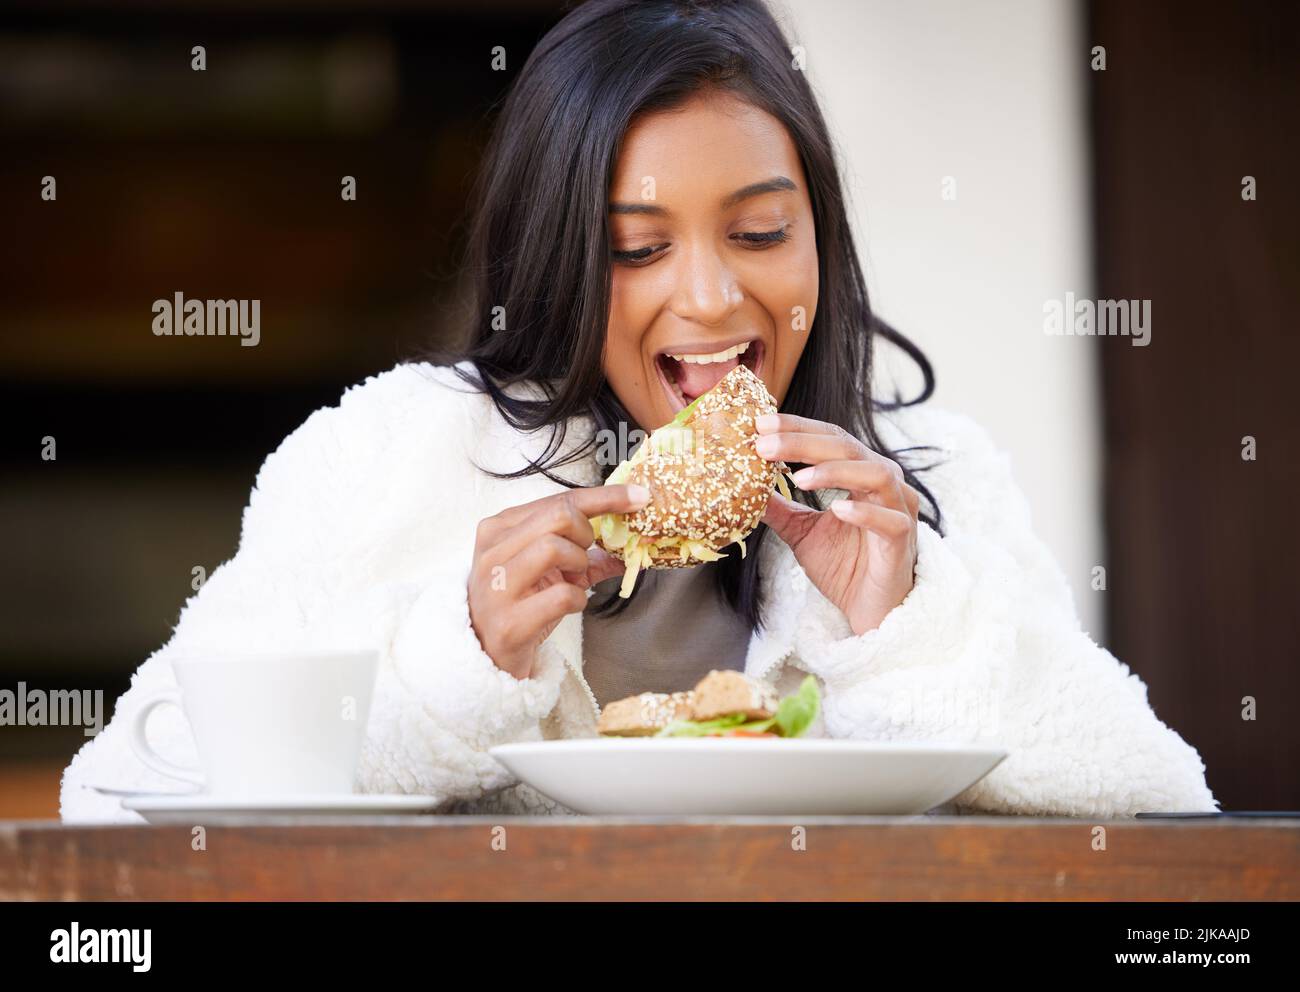 Lunchtime is the best part of my day. a young woman eating. Stock Photo